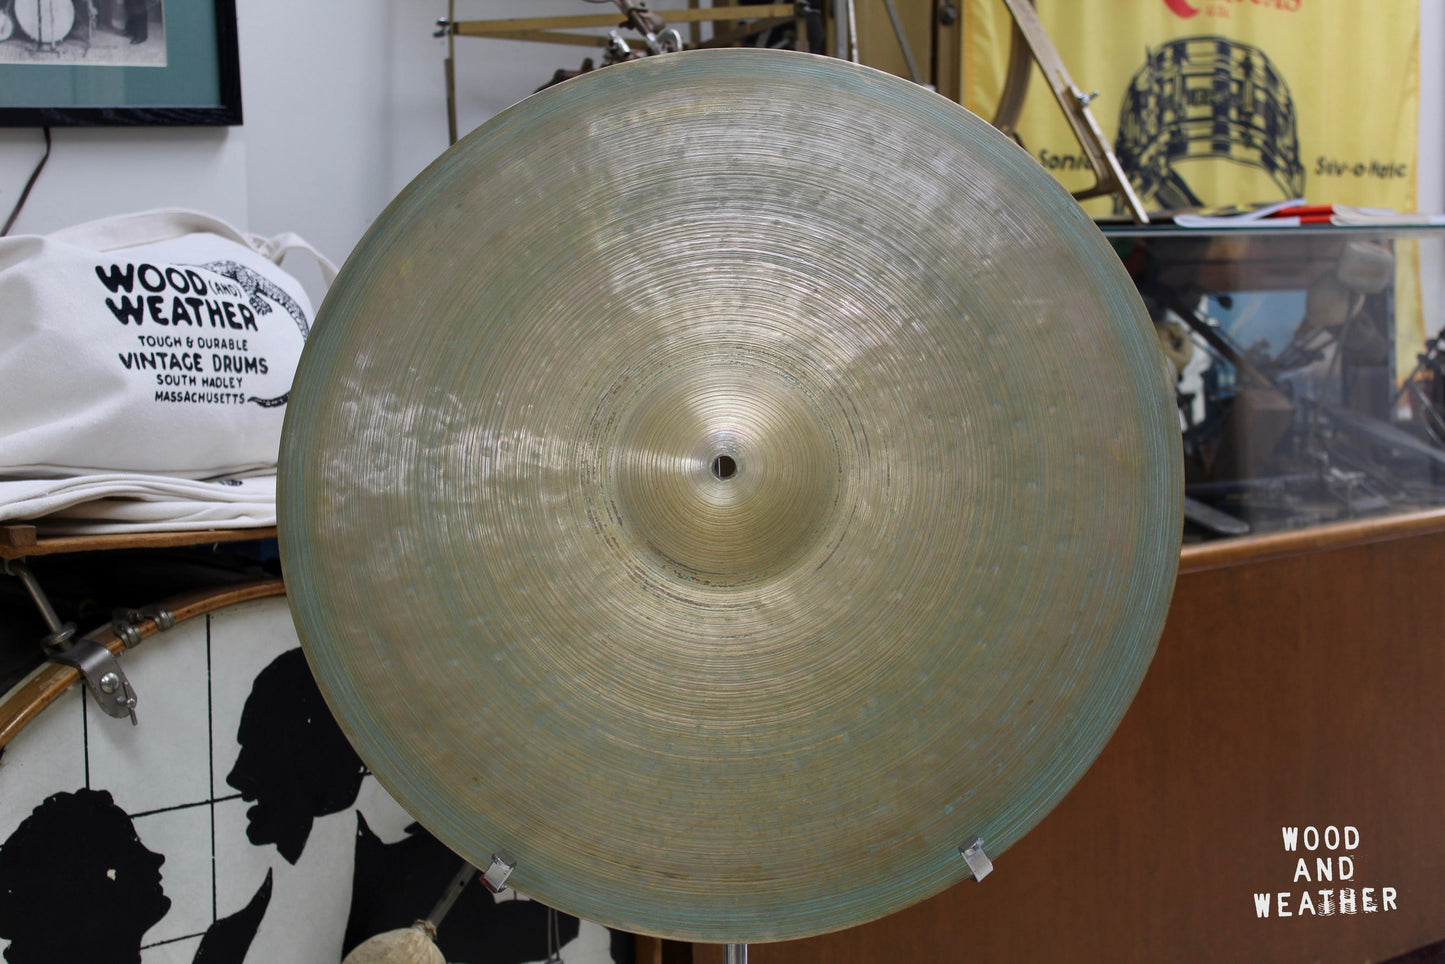 PGB Artisan Cymbals 22" Traditional Dry Ride Cymbal 2230g